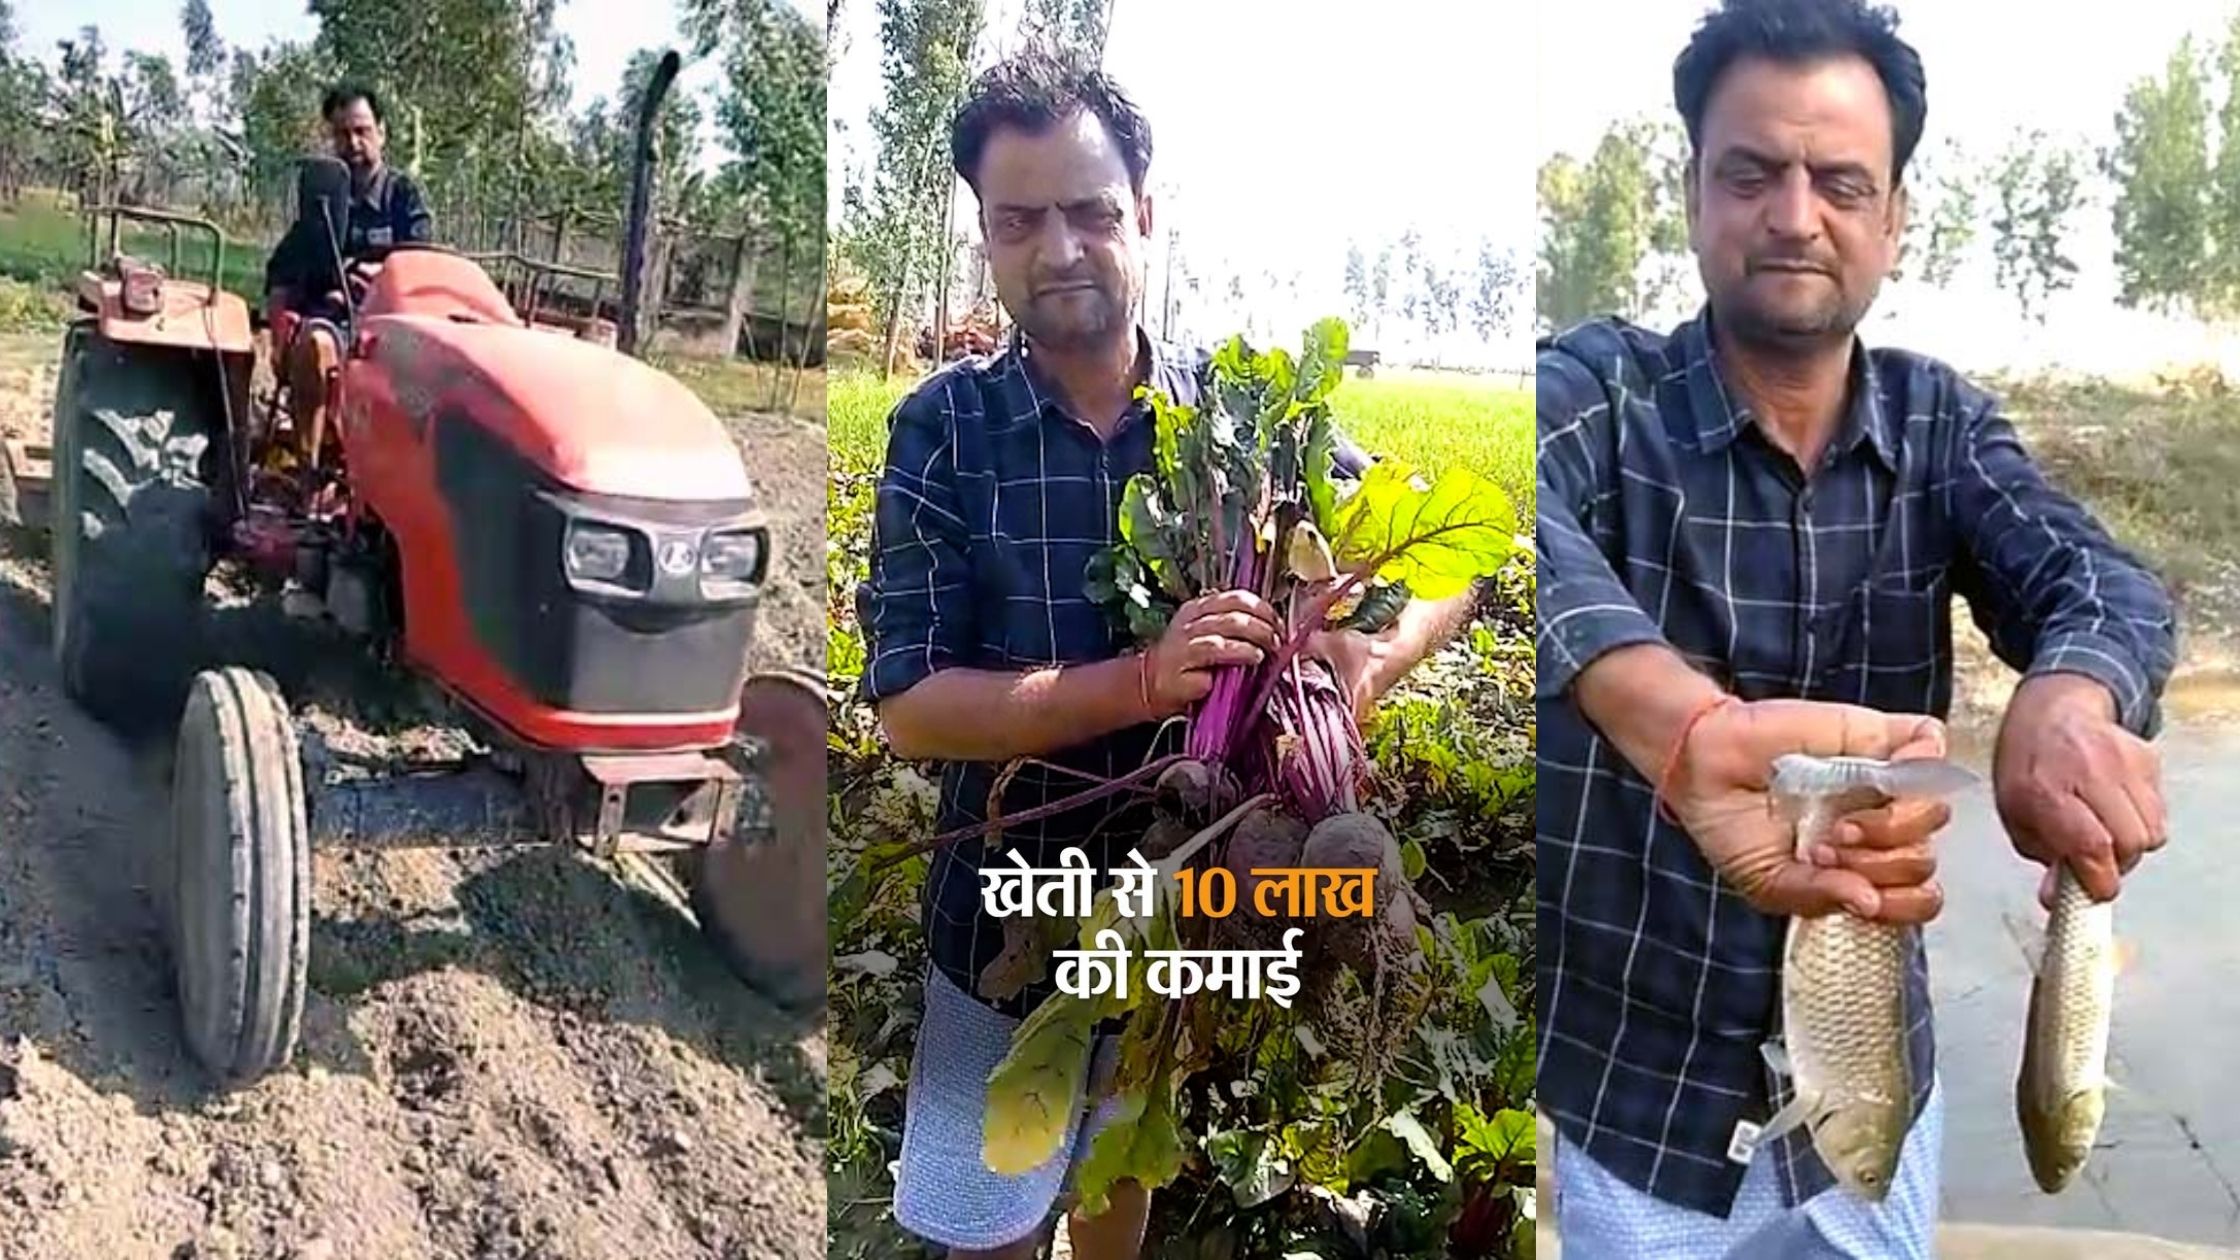 Manish of Bihar is earning 10 lakh annually from farming